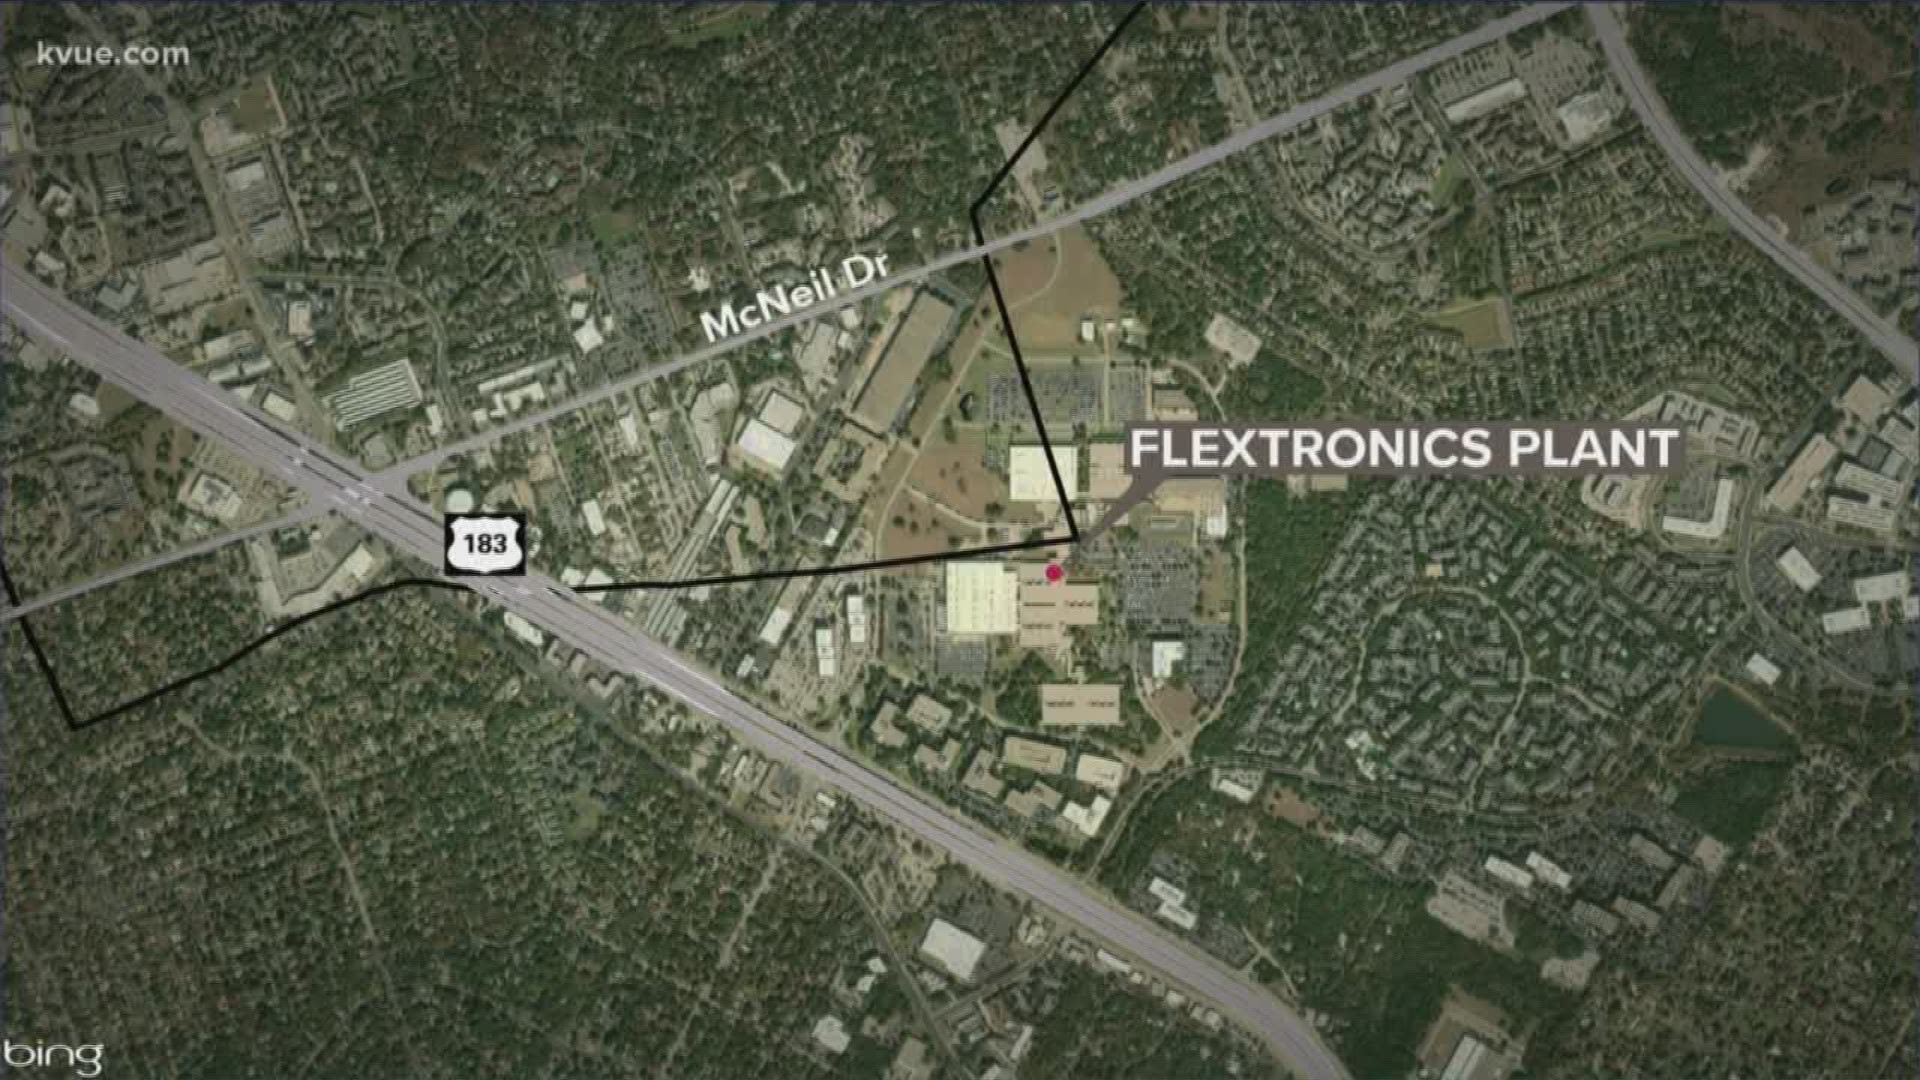 The president is set to land at 1:20 p.m. and travel to the Flextronics in northwest Austin.